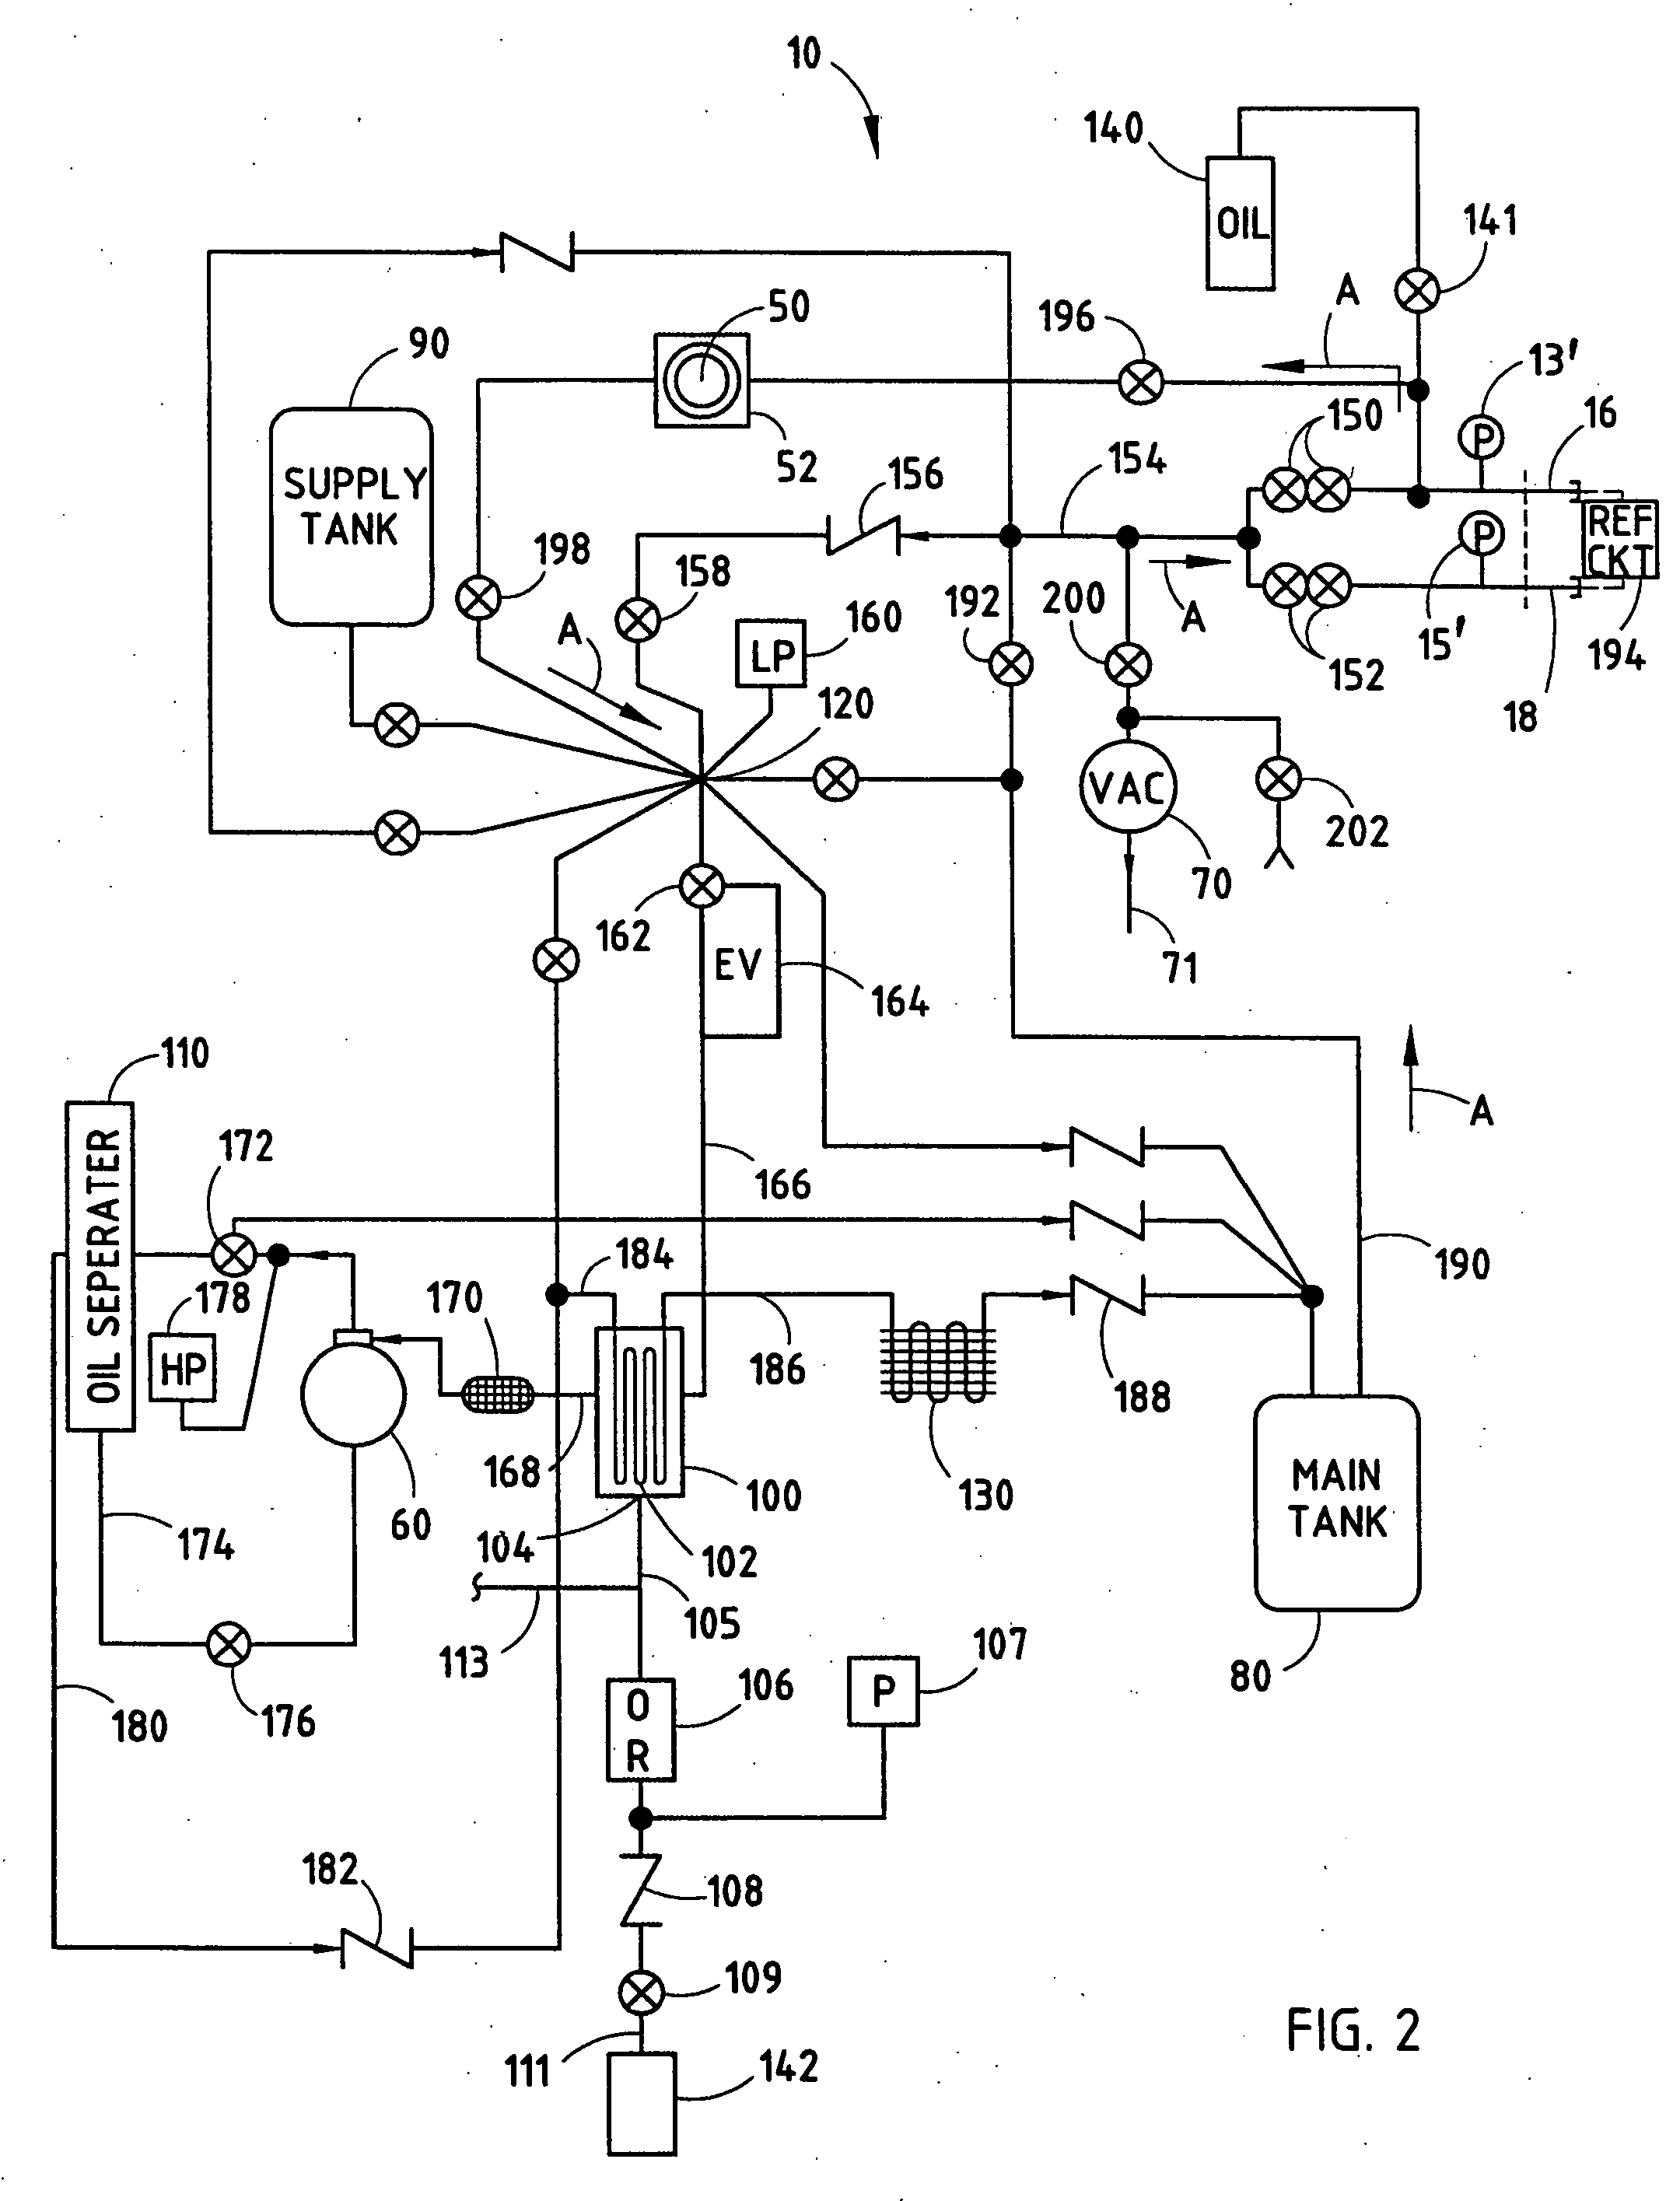 Modular recovery apparatus and method